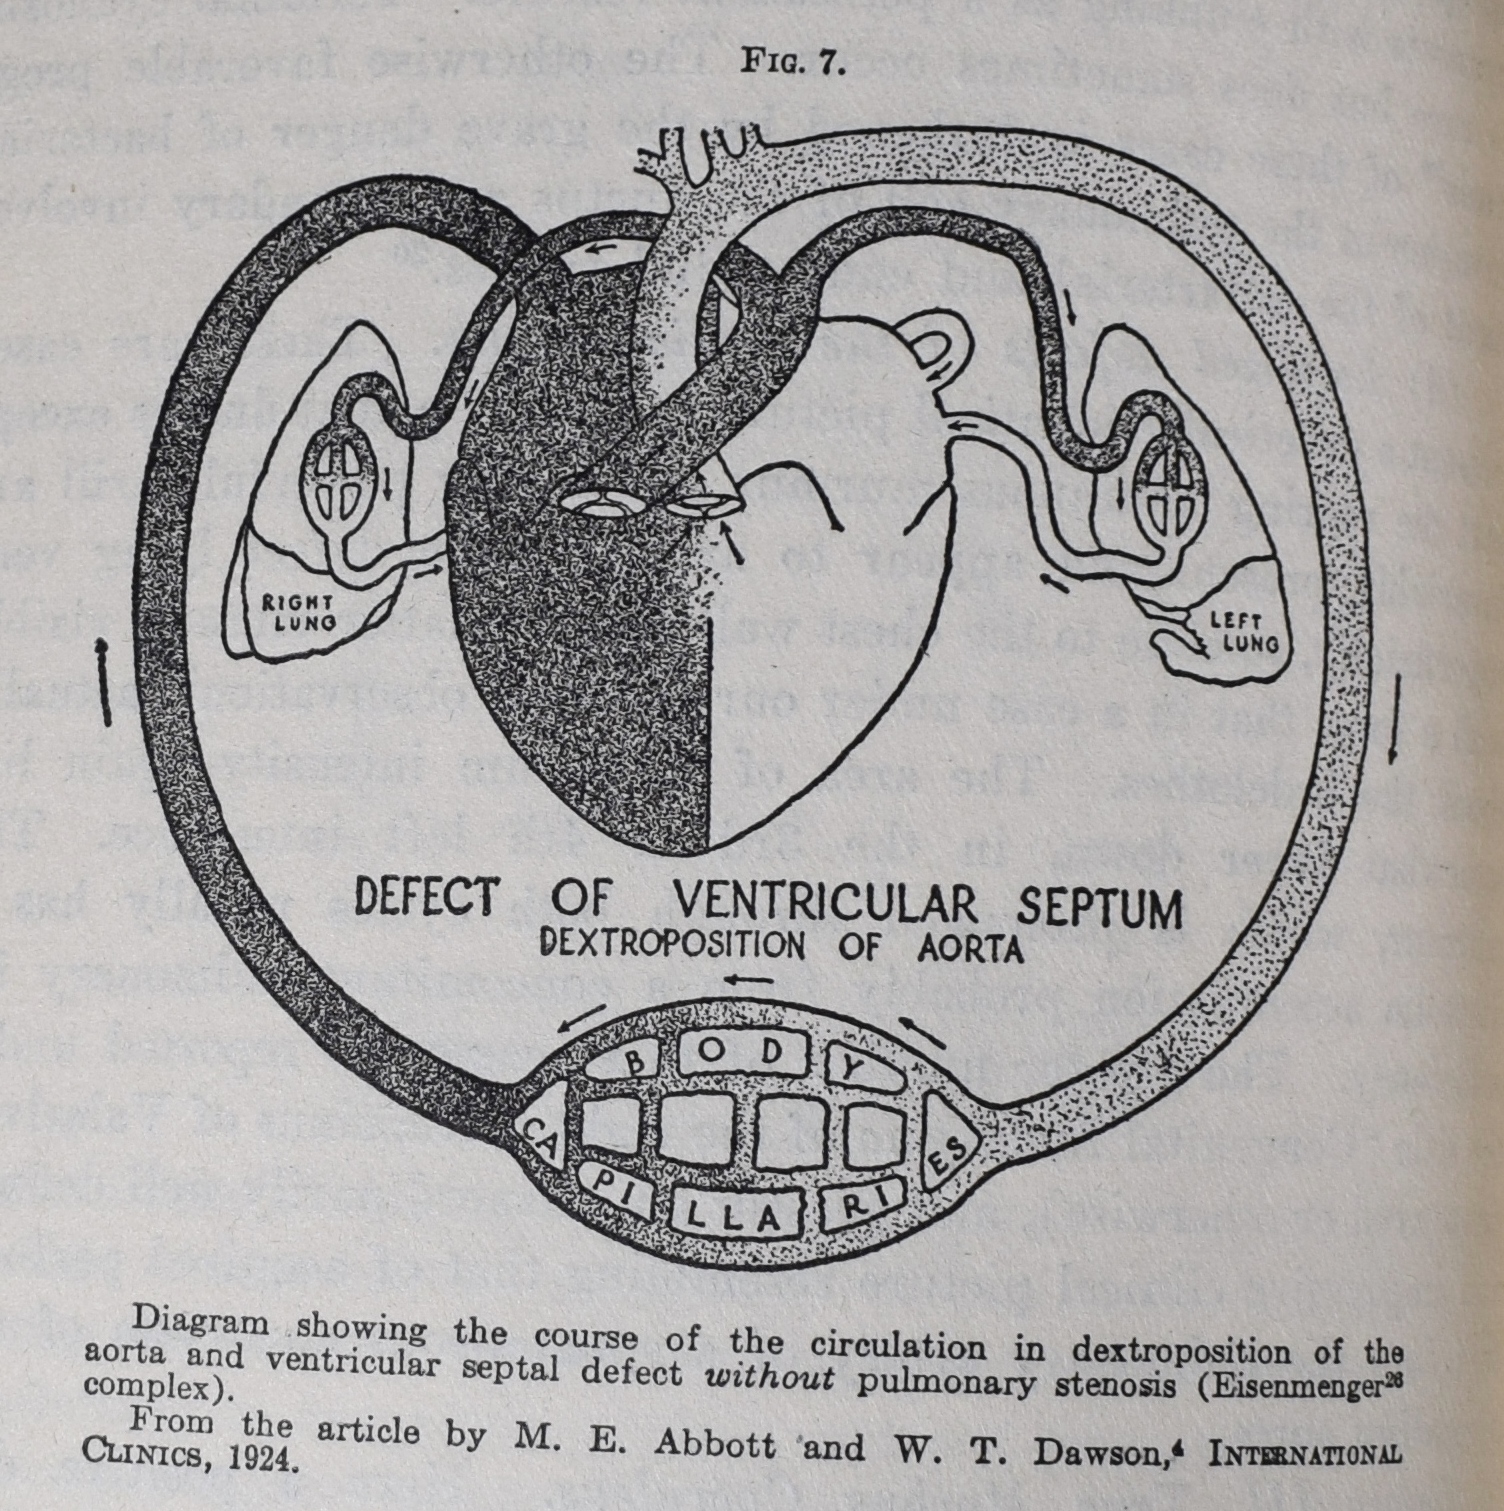 Black and white diagram of the cardiovascular system showing a defect of the ventricular septum and dextroposition of the aorta; black ink on white paper.